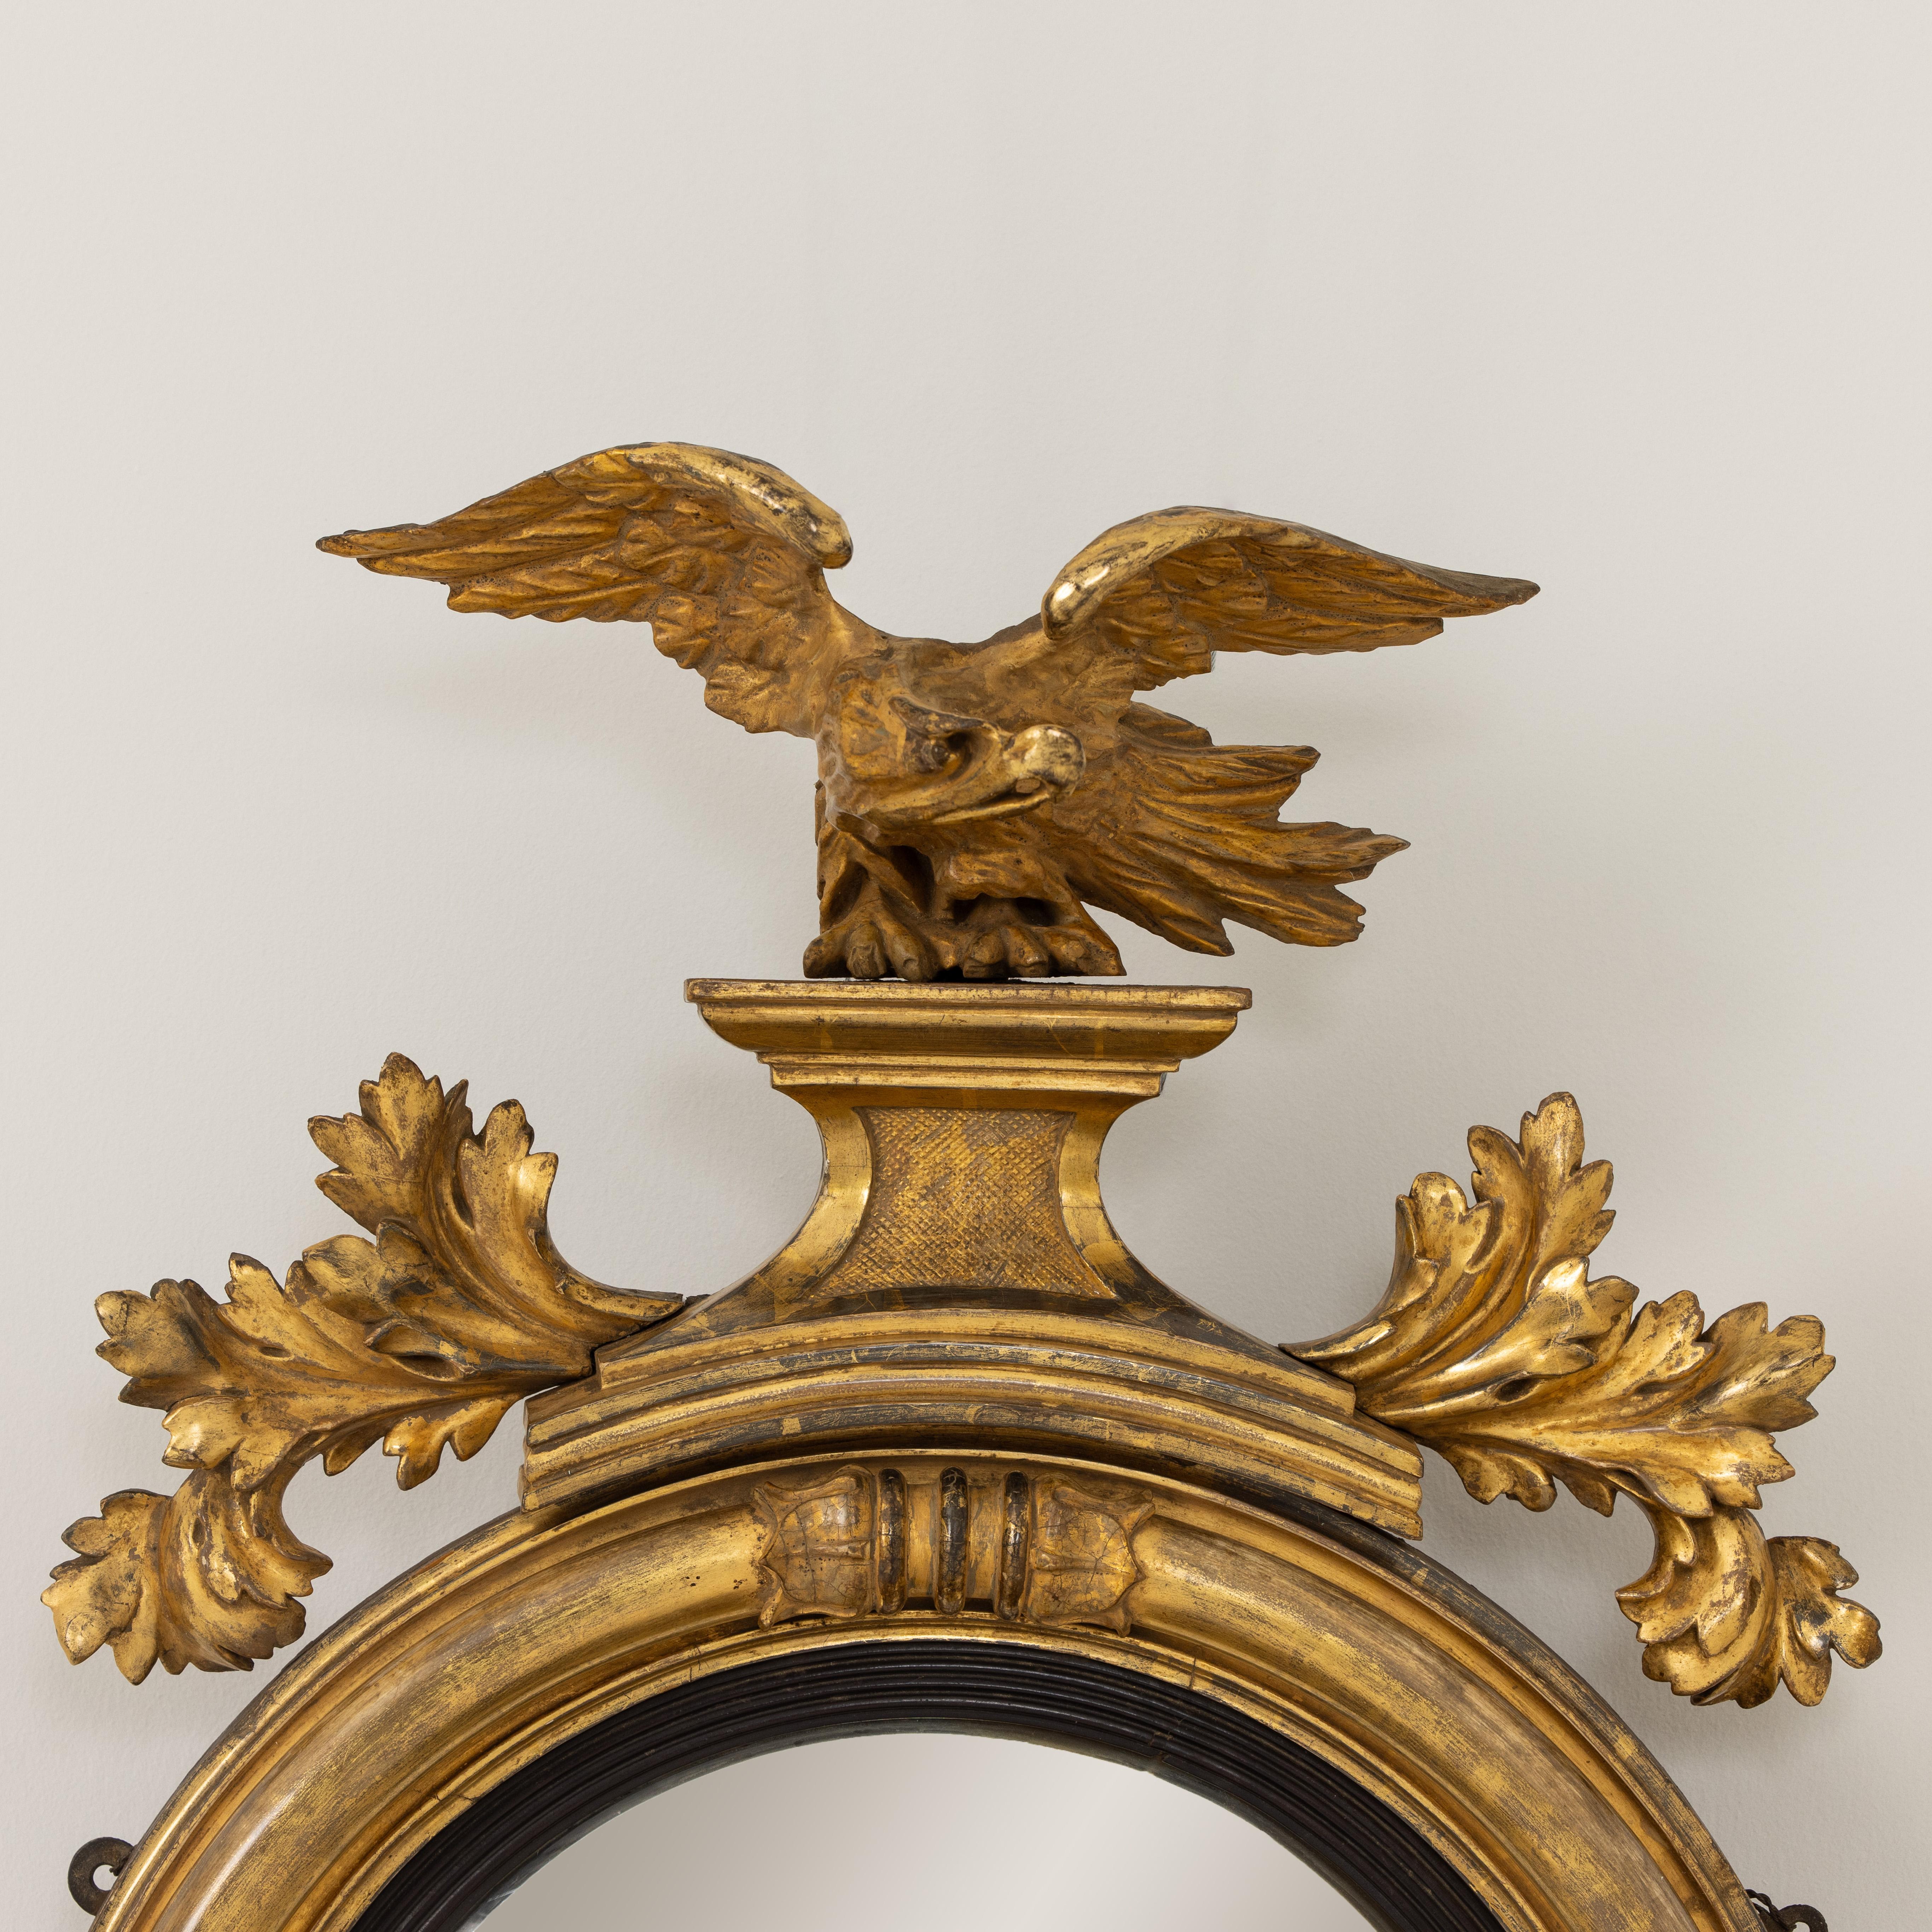 A fine Regency original giltwood mirror with convex mirror plate. The frame features carved lotus flower terminals meeting at the four compass points. The mirror is topped by a cresting of an eagle on a pedestal with leafy branches below. At the